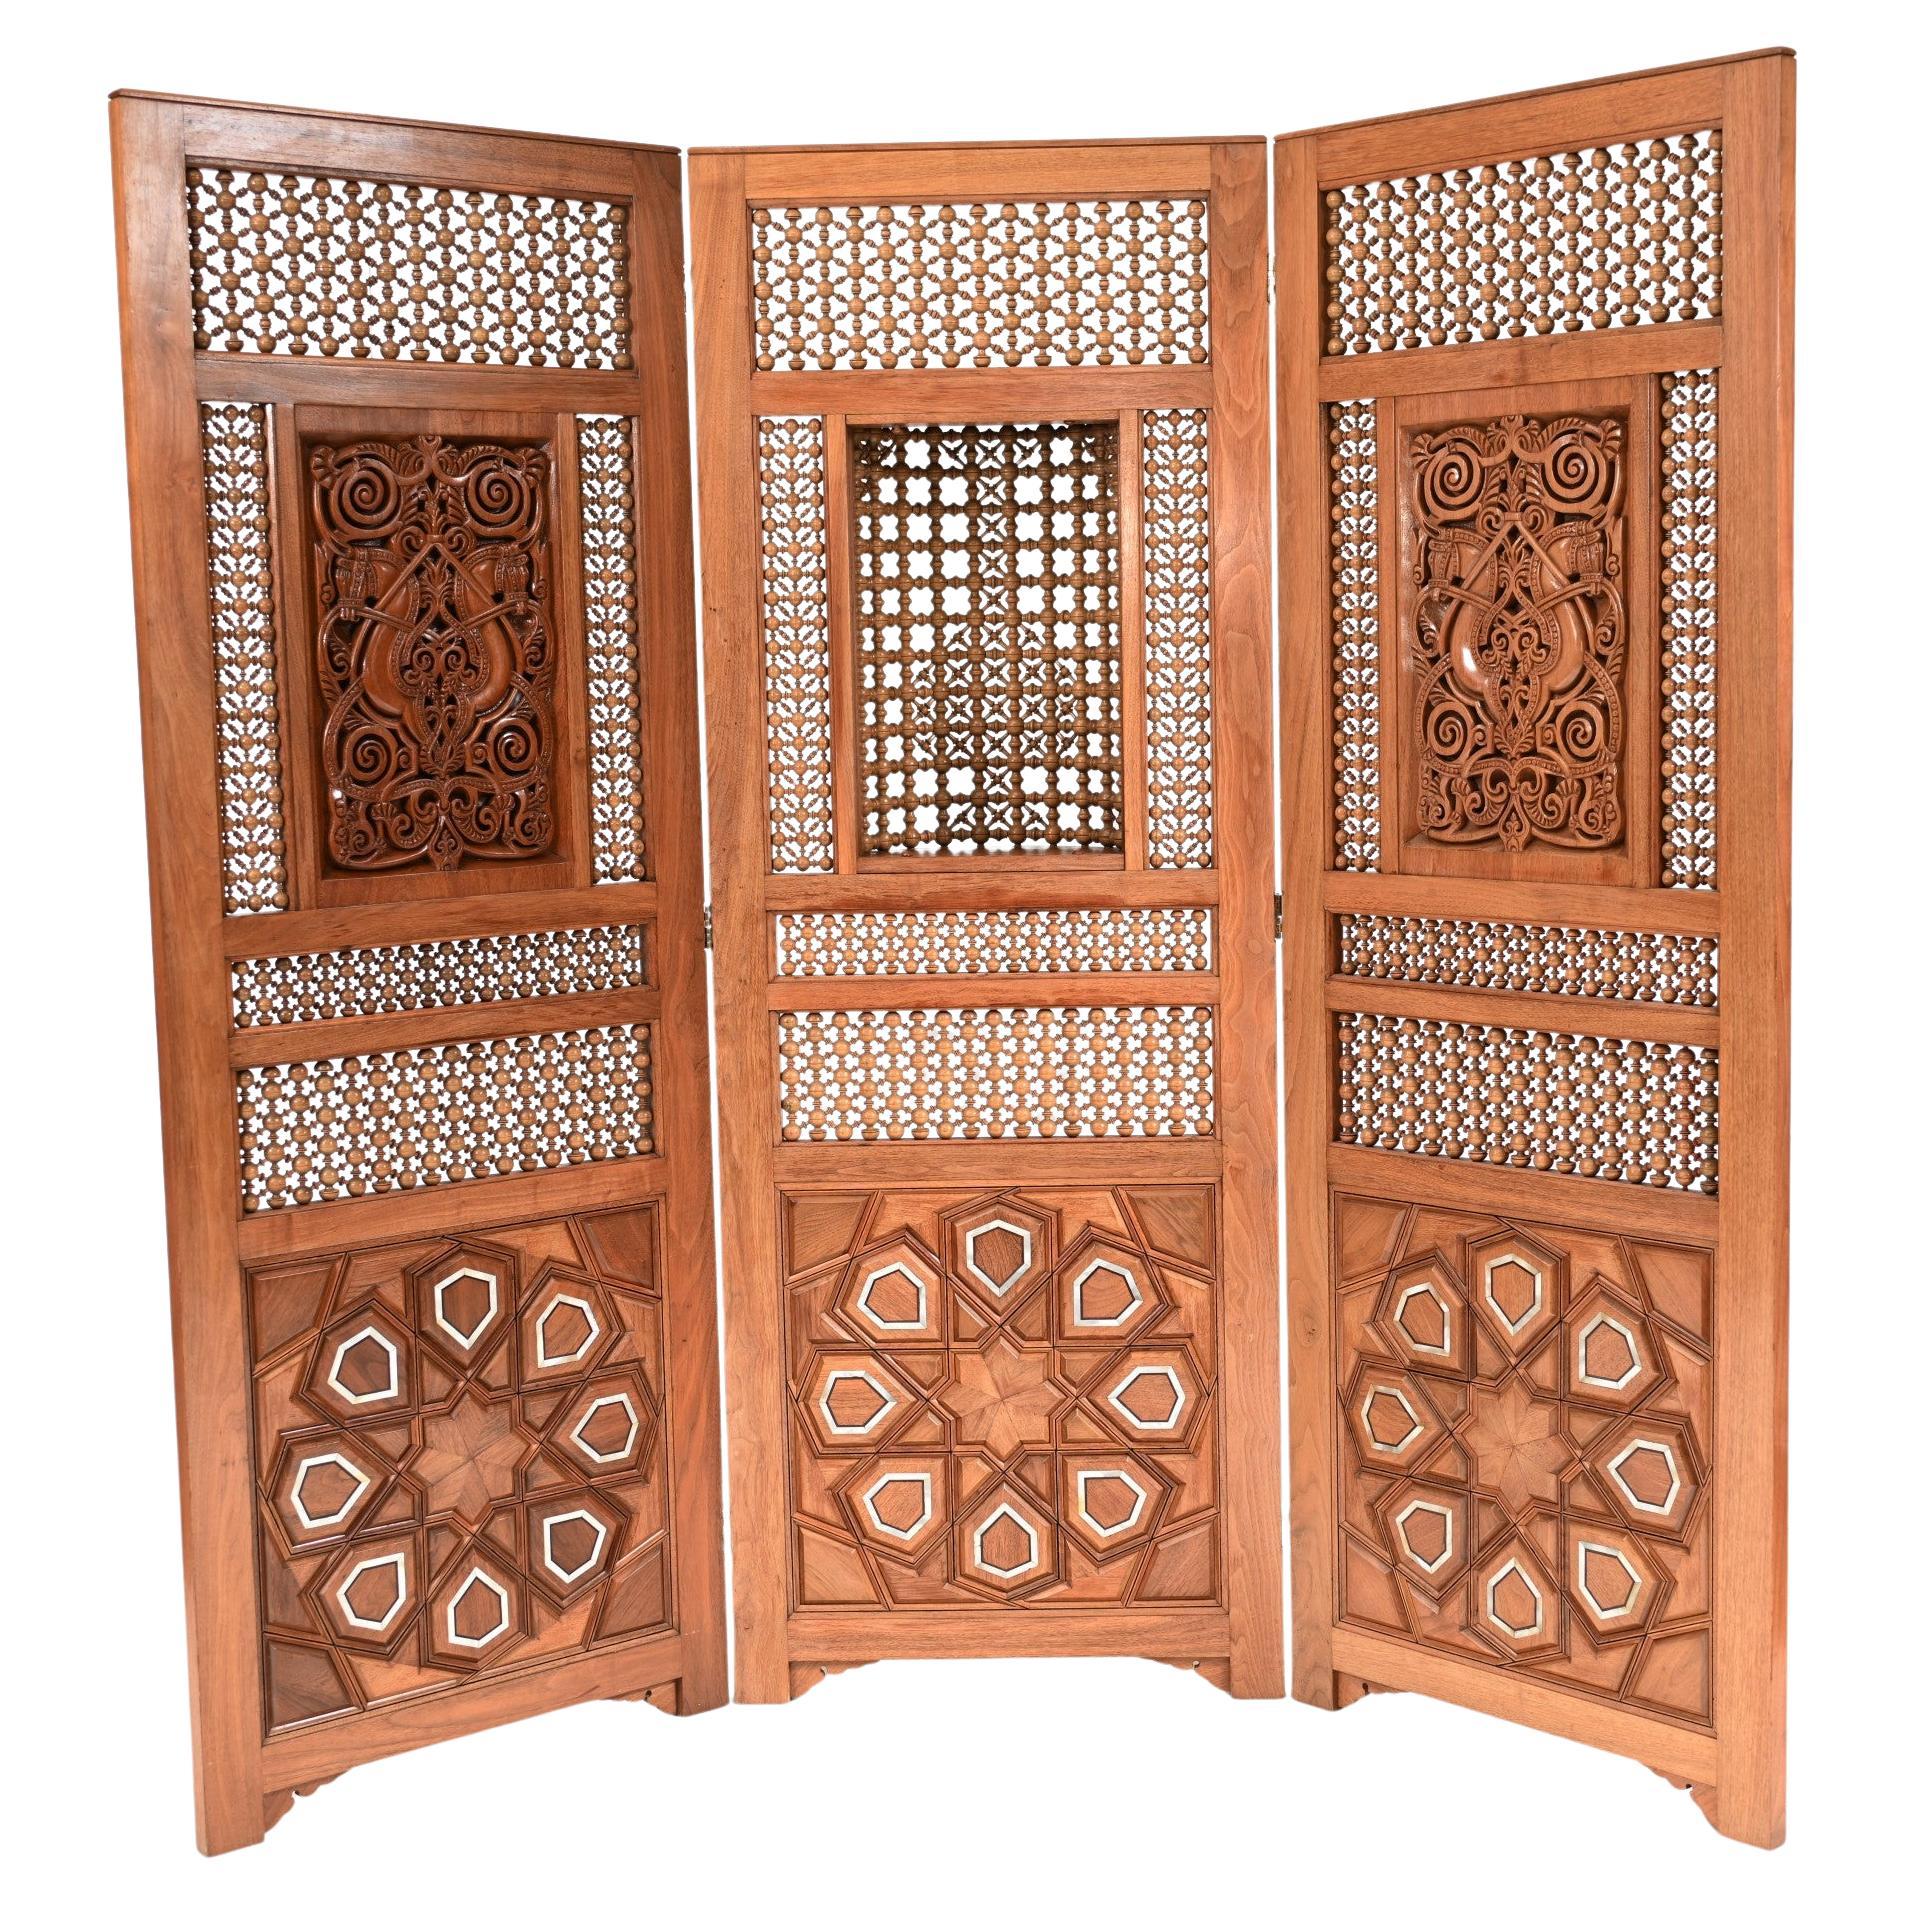 Damascan Inlay Screen Room Divider Arabic 1930s For Sale